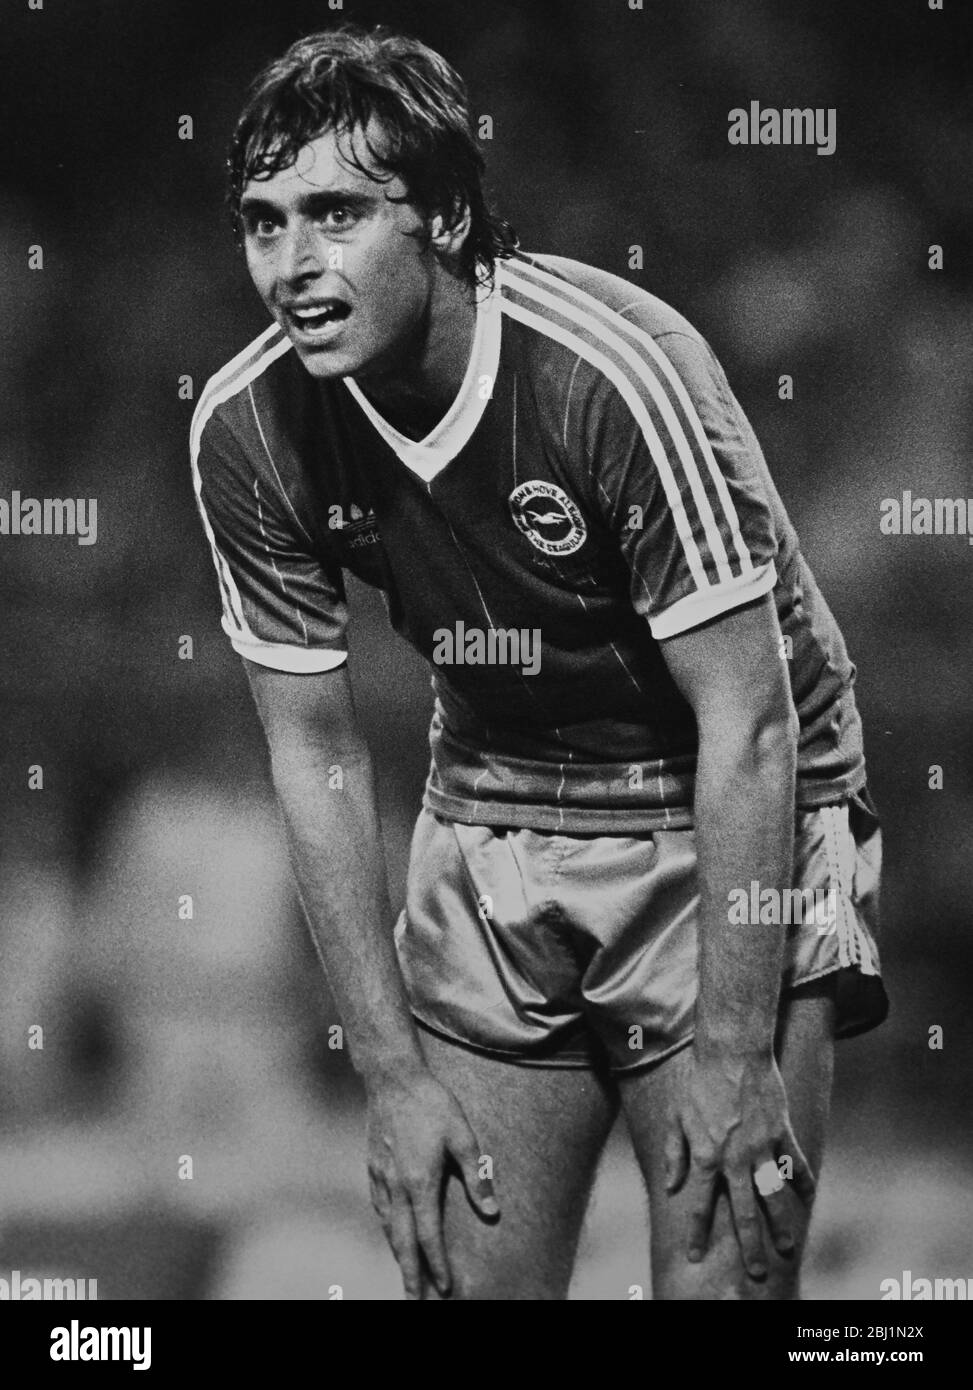 Brighton and Hove Albion's Michael Robinson looks dejected after they had lost to Manchester United in the 1983 FA Cup Final Replay on 26 May 1983 at Wembley Stadium (deceased 2020) Stock Photo